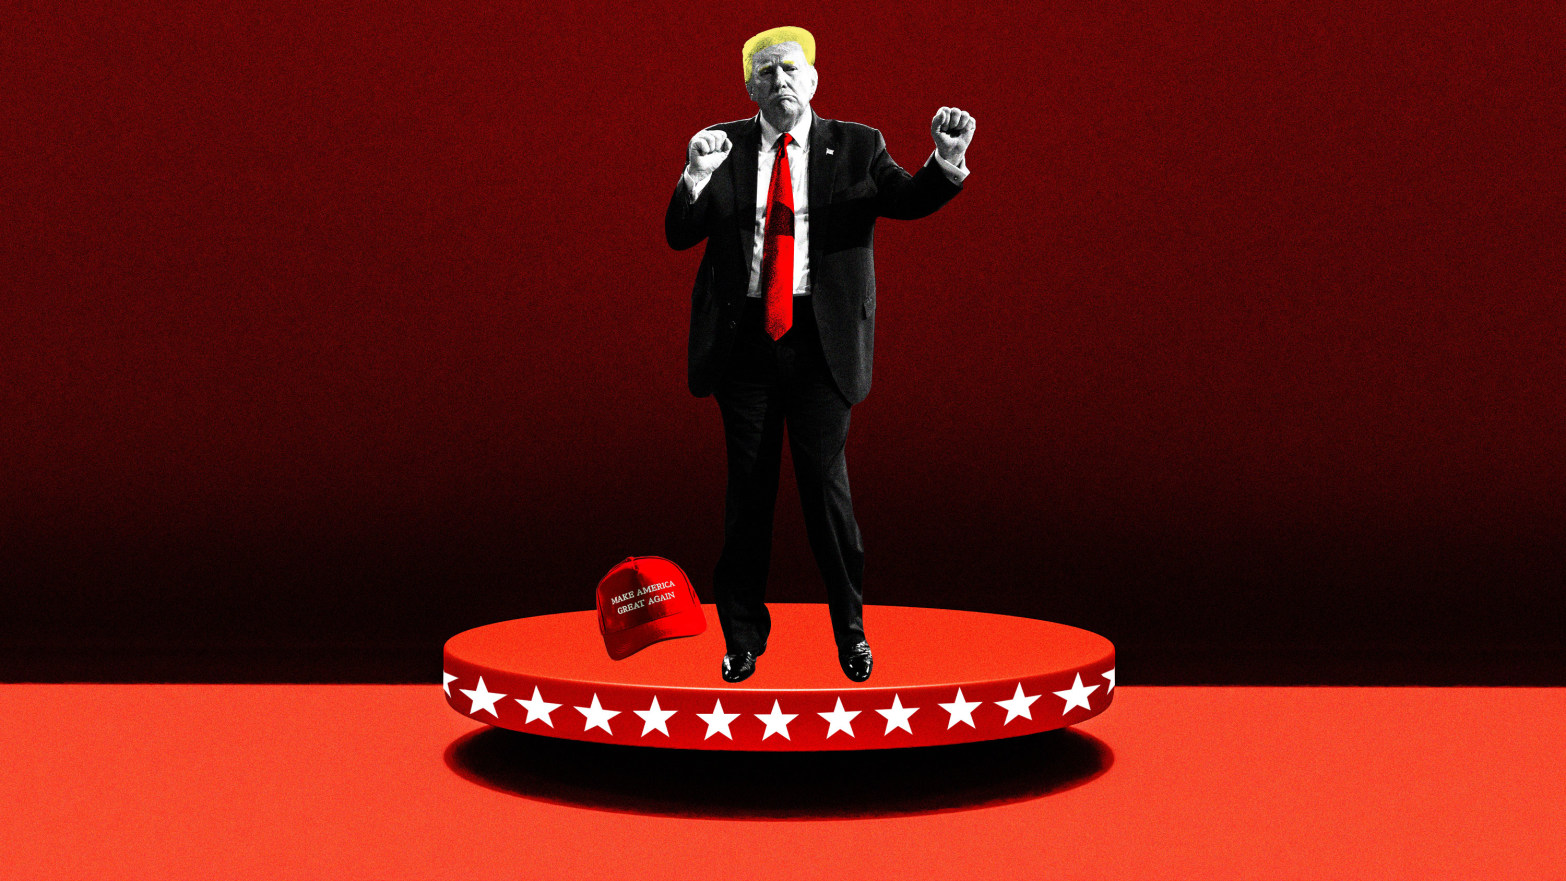 An illustration including Former US President Donald Trump, a floating Podium, Stars, and a Make America Great Again cap